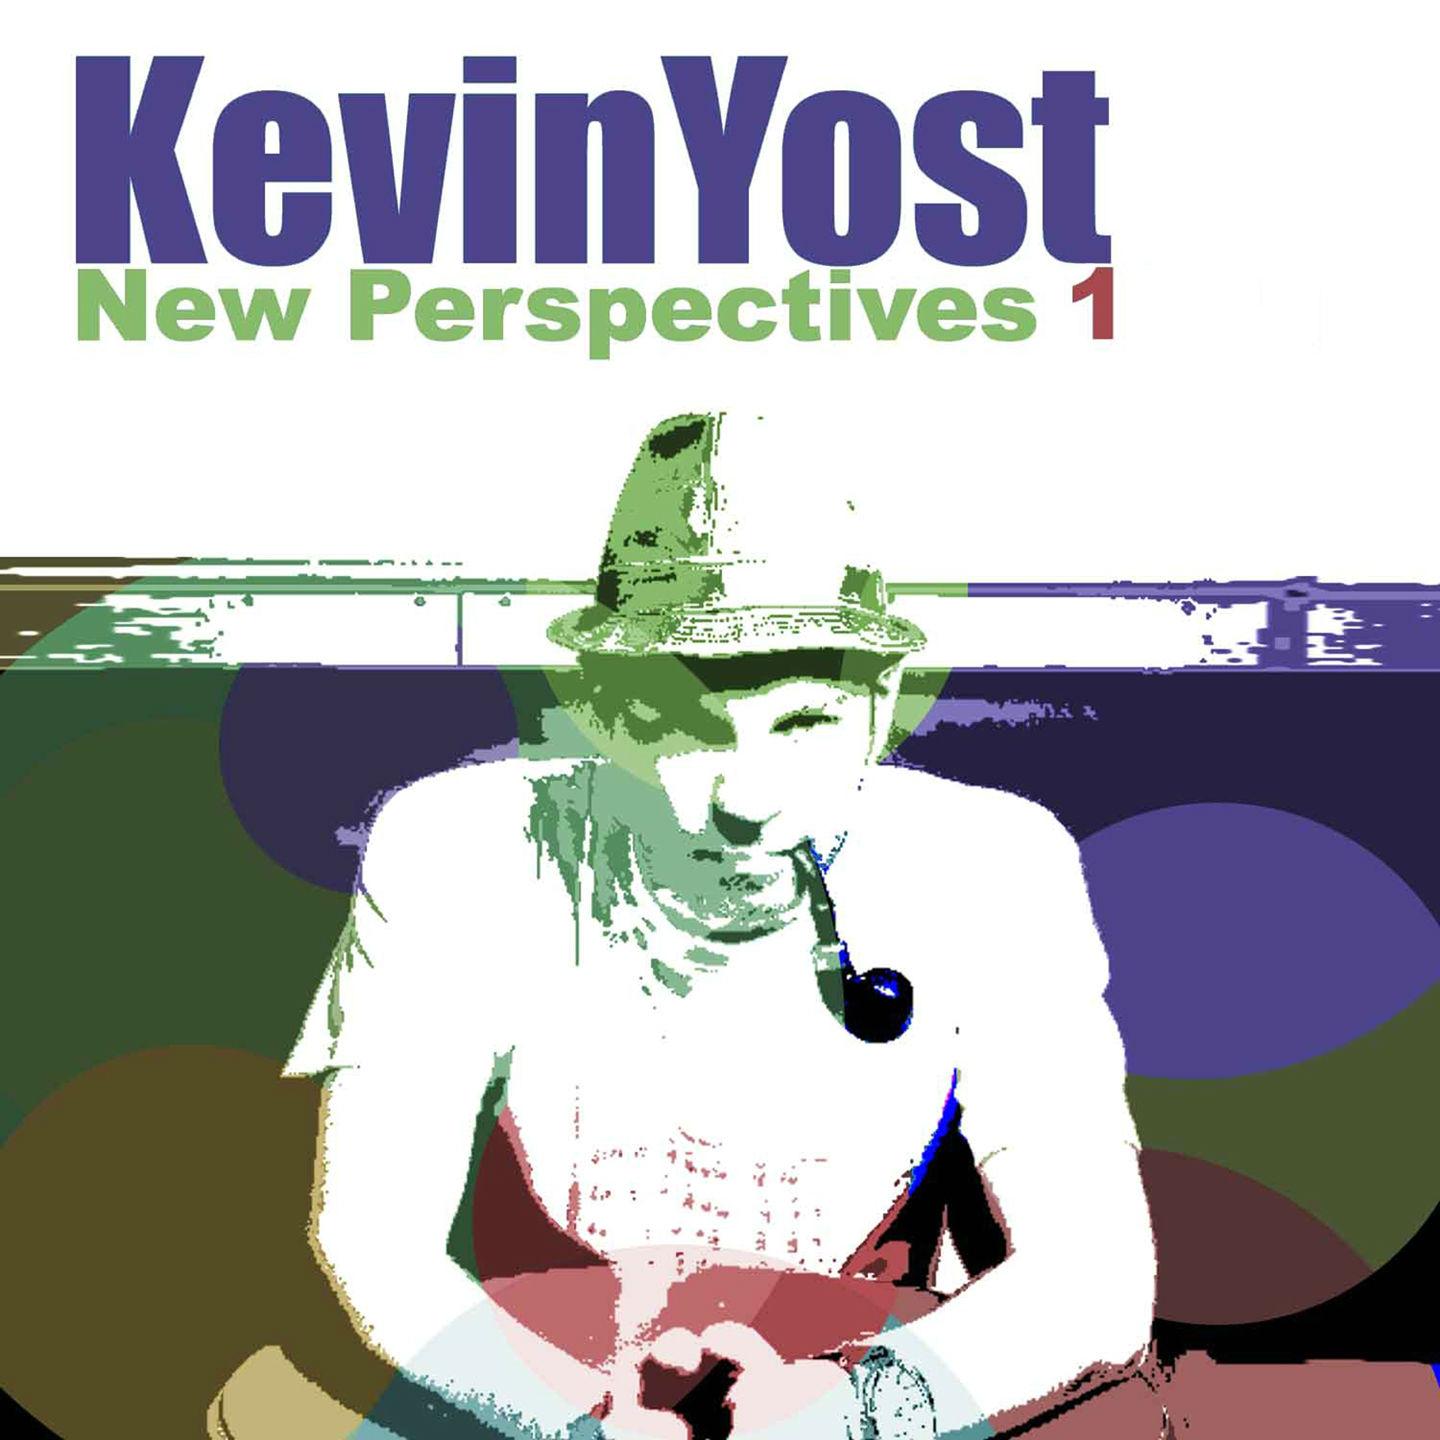 New Perspectives, Vol. 1